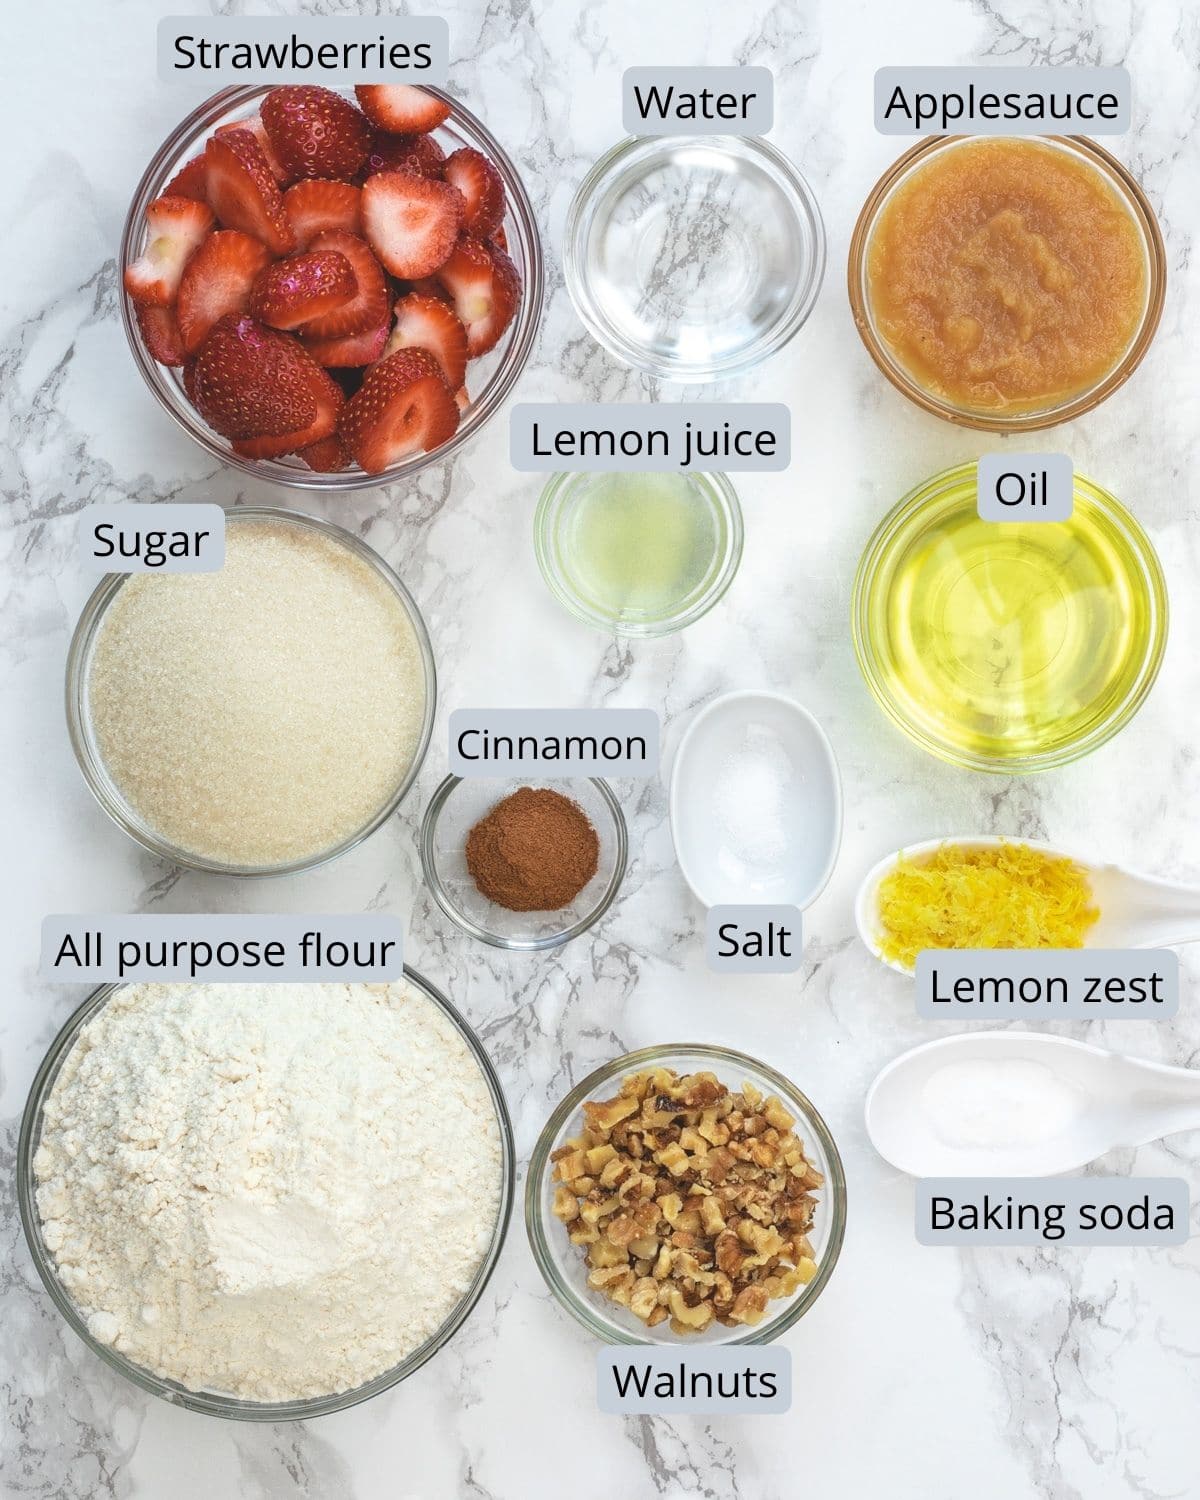 Ingredients used in strawberry bread with labels on marble surface.